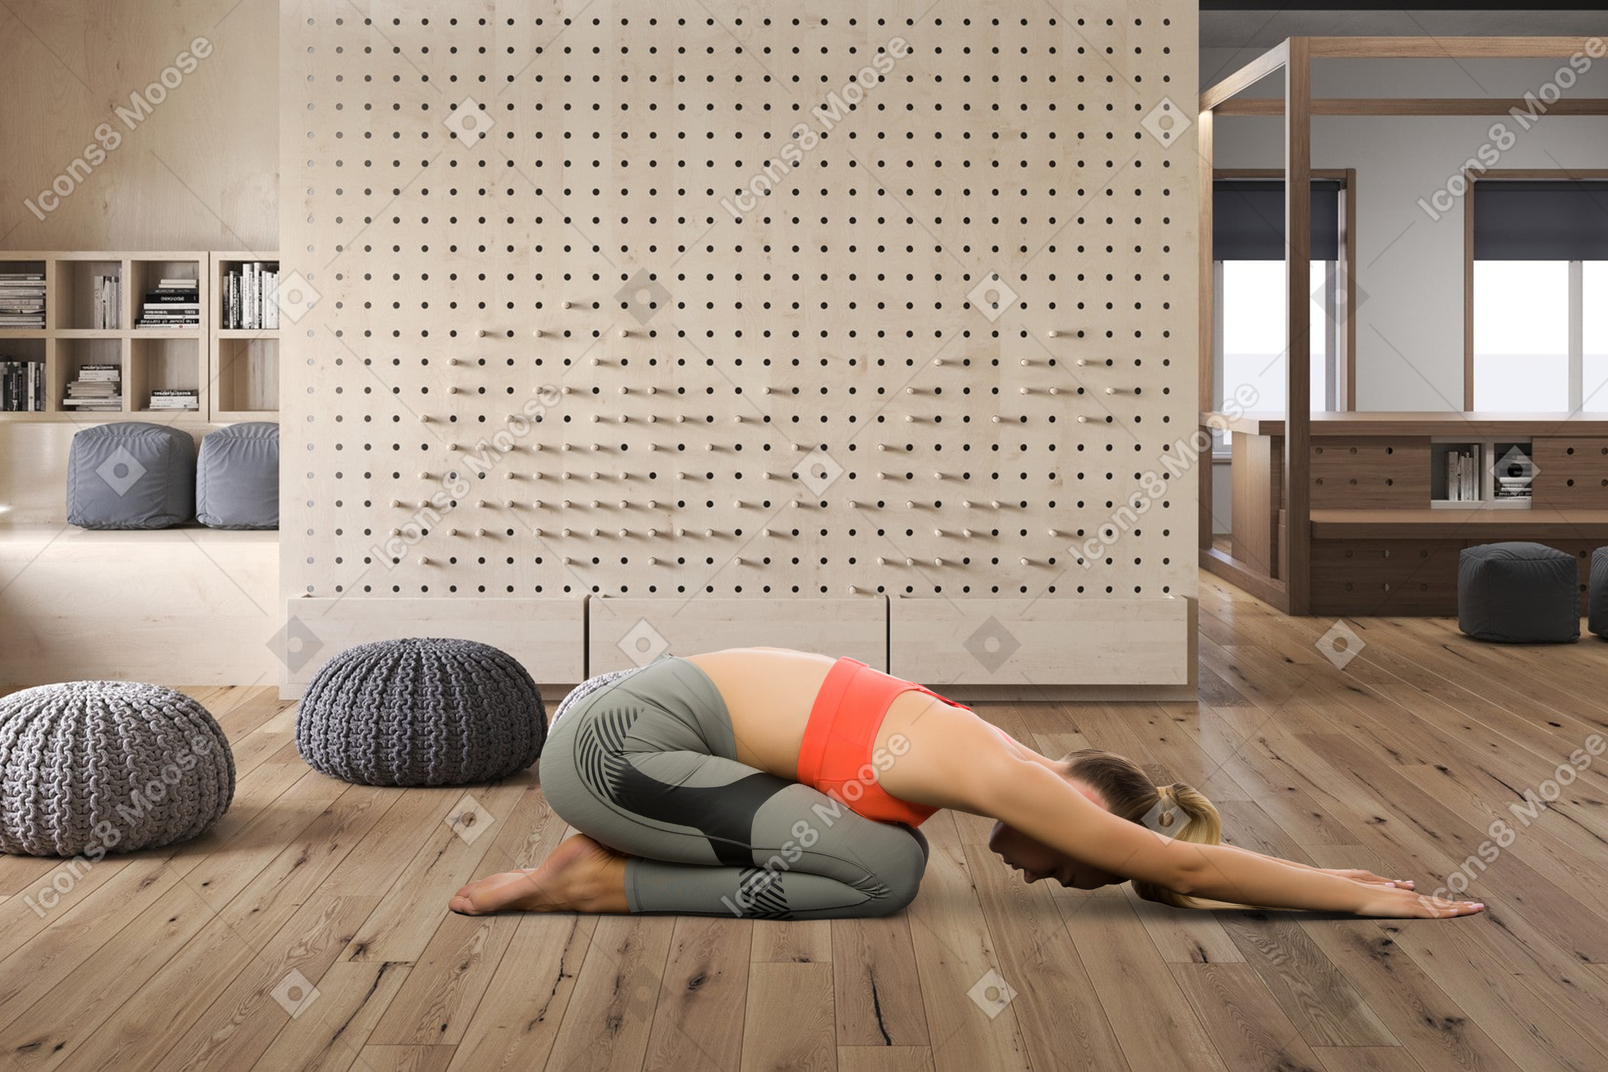 A woman in a yoga position on a wooden floor